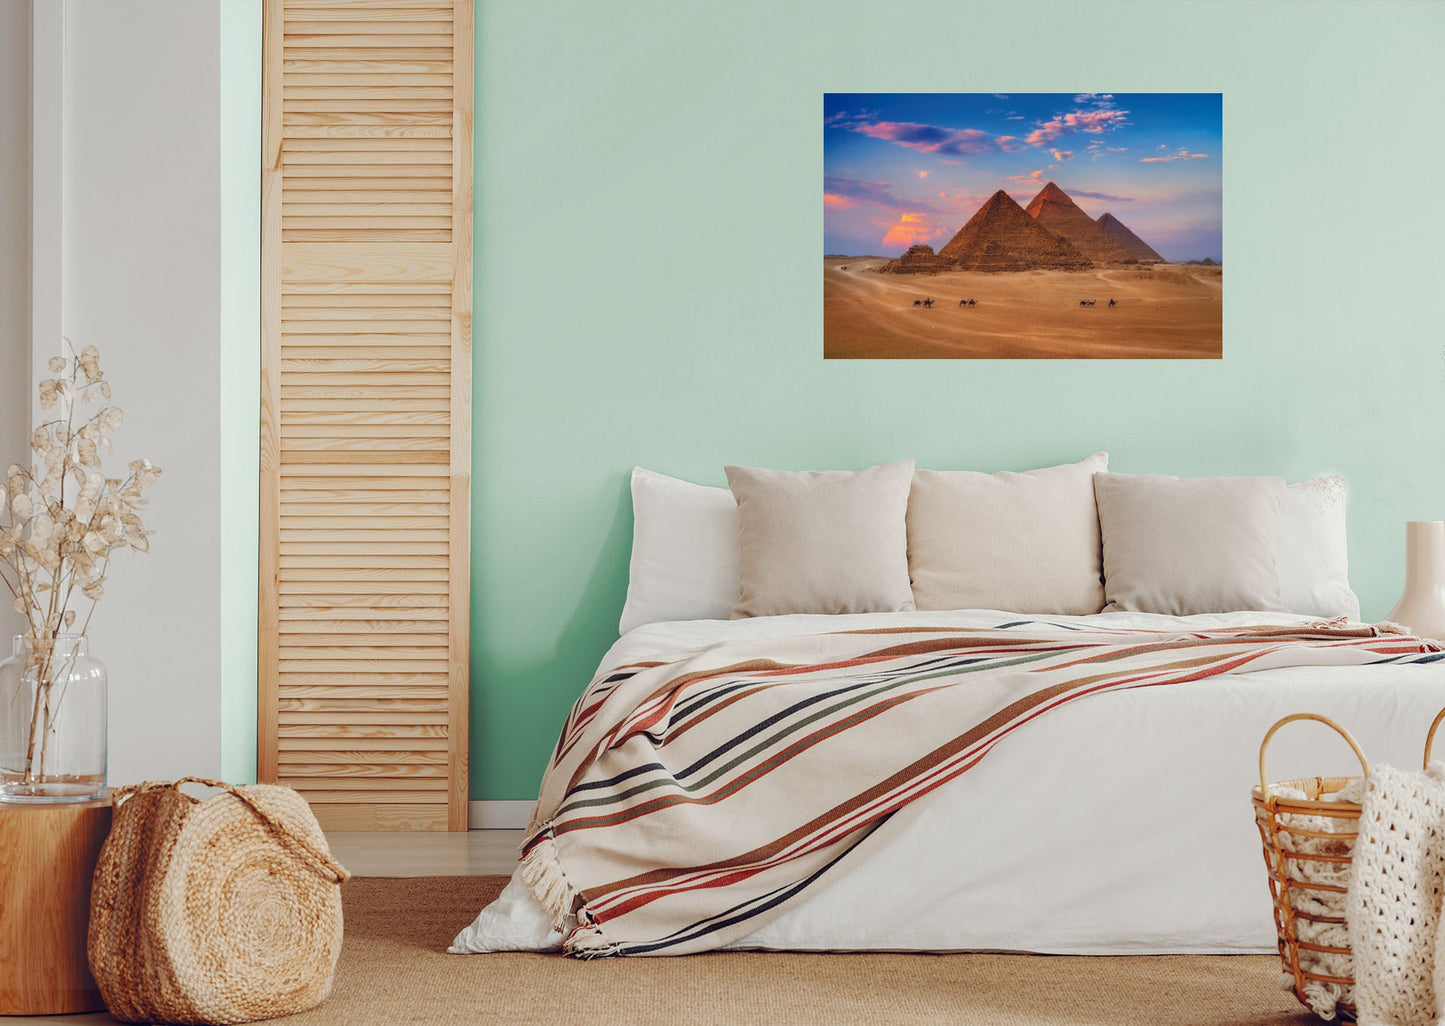 Popular Landmarks: Great Pyramid of Giza Realistic Poster - Removable Adhesive Decal